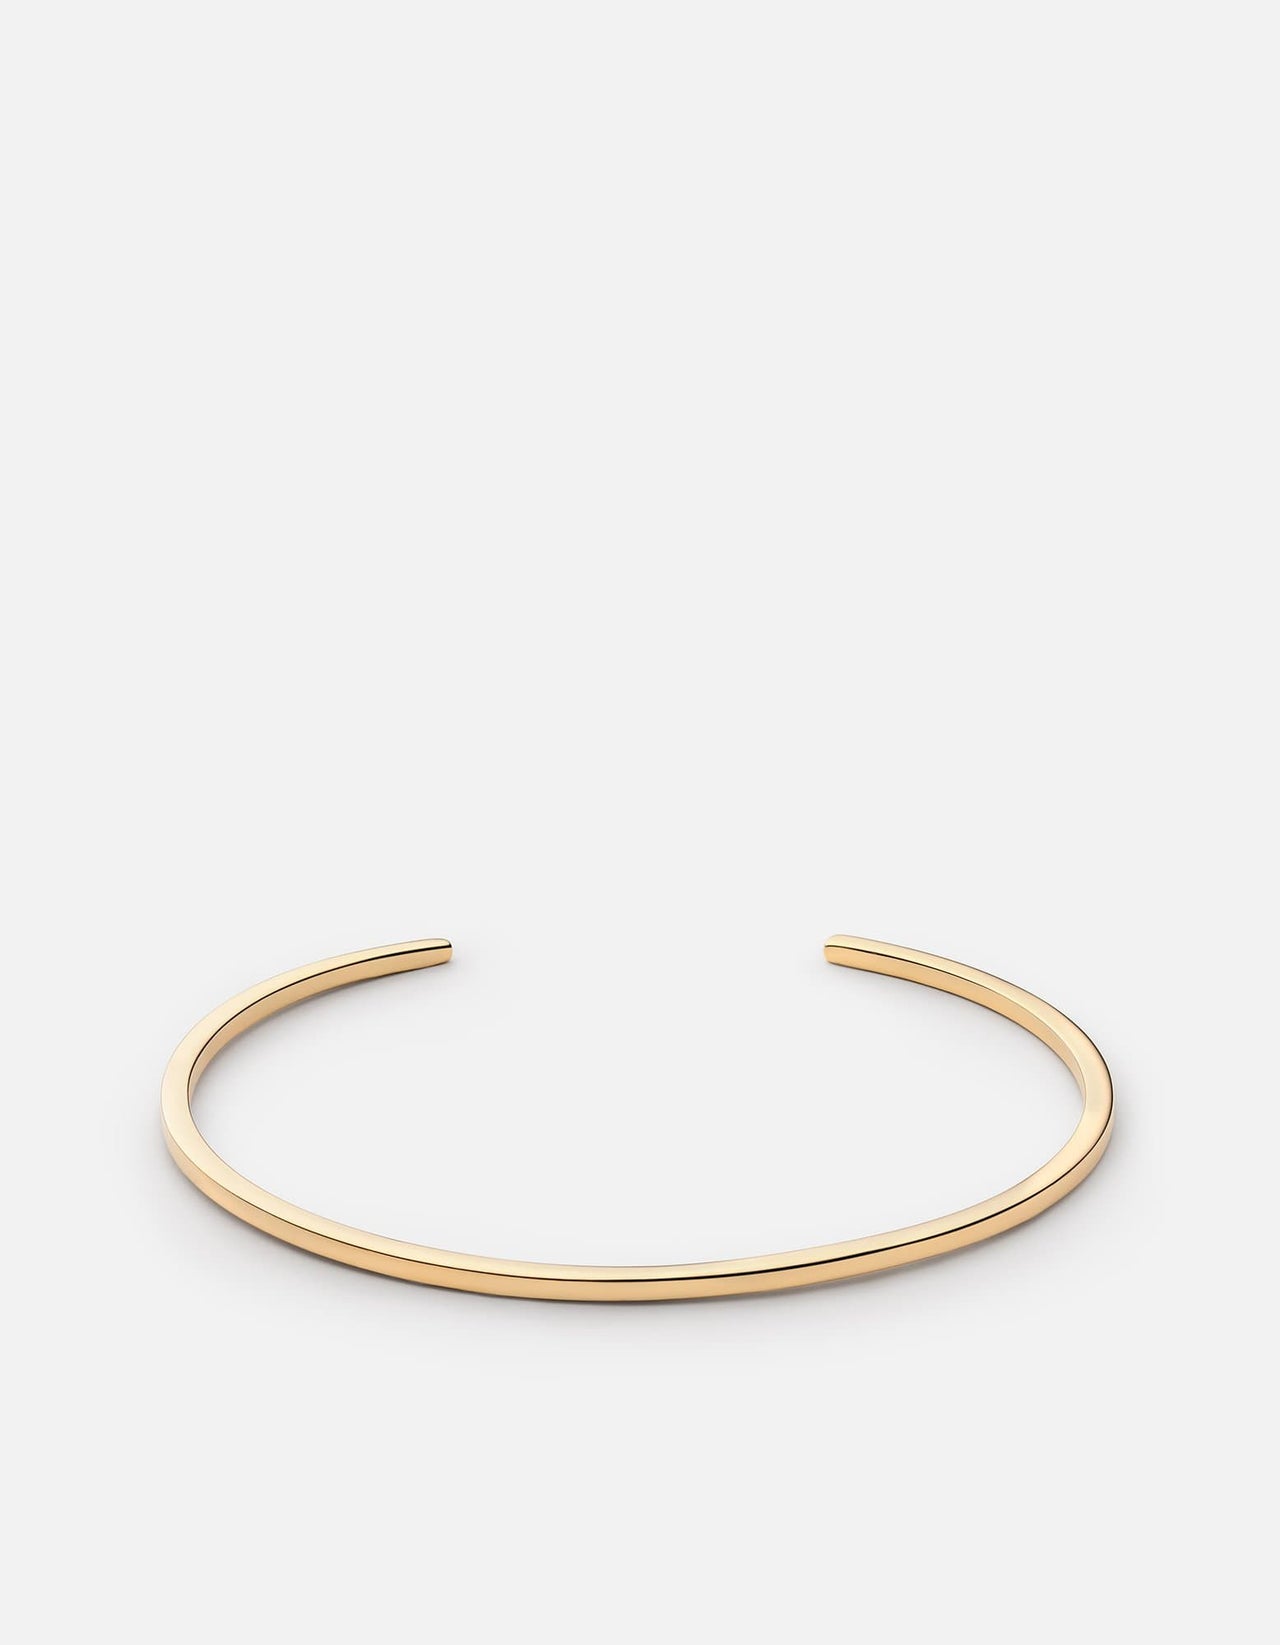 Signature Thin Bangle in 18k Gold Vermeil on Sterling Silver